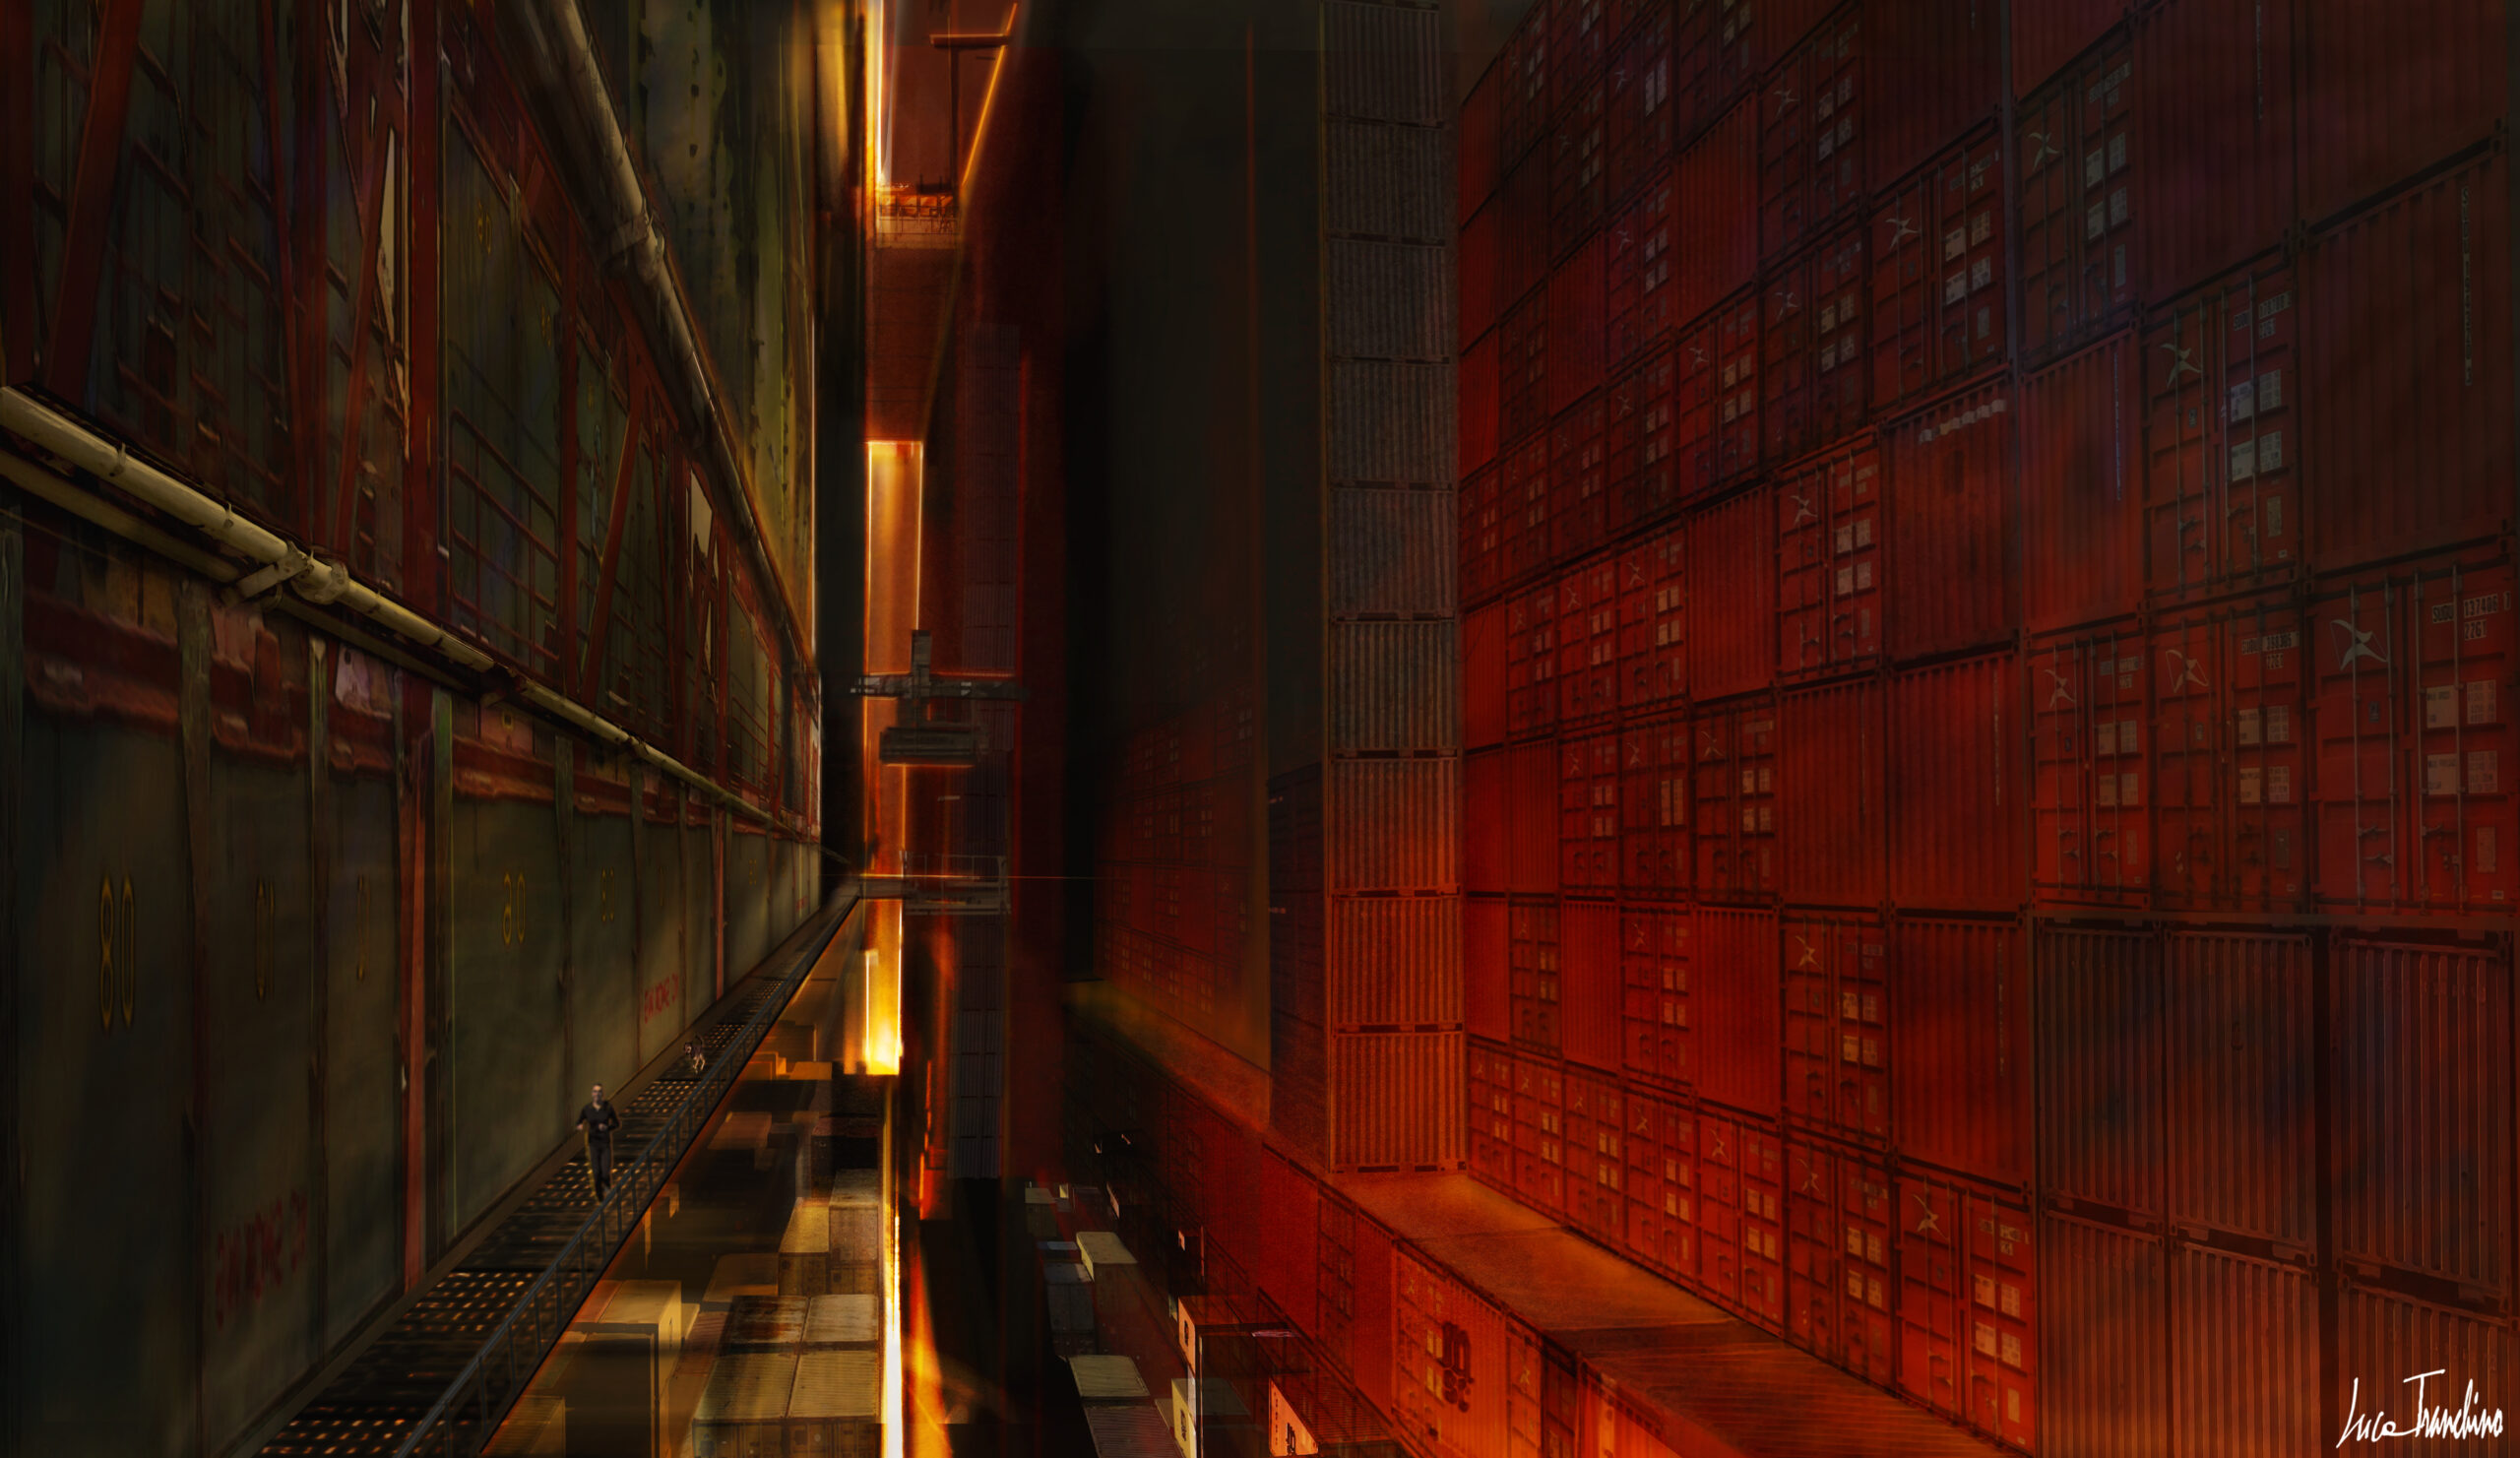 “Int. Shipping Containers Cargo”, Concept Art by Luca Tranchino - ©2012 - Mixed Media